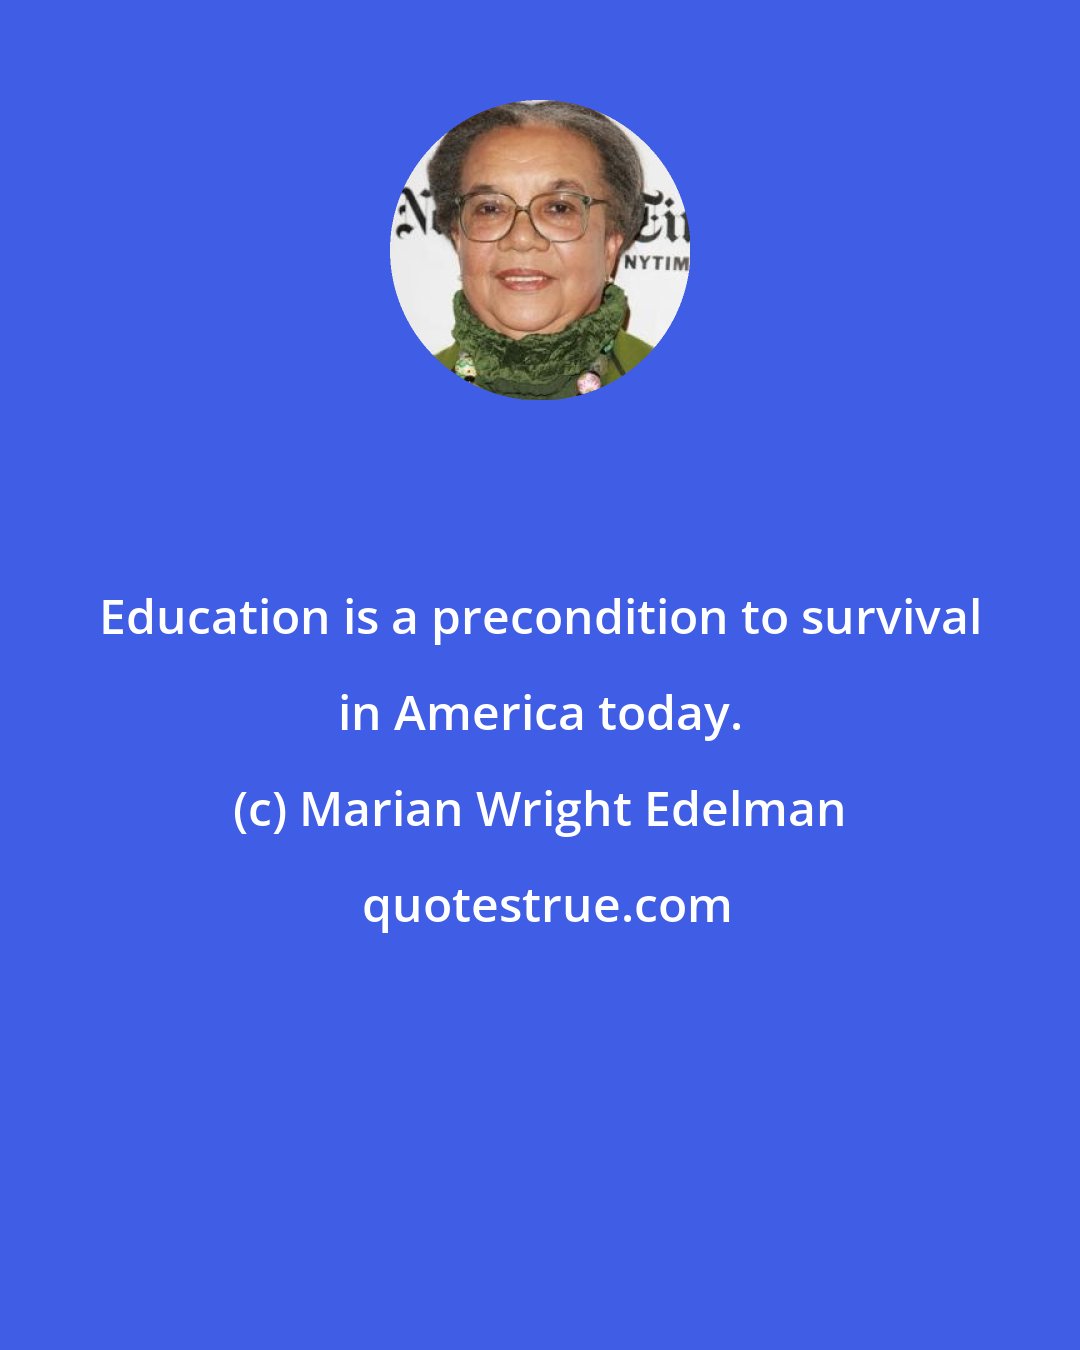 Marian Wright Edelman: Education is a precondition to survival in America today.